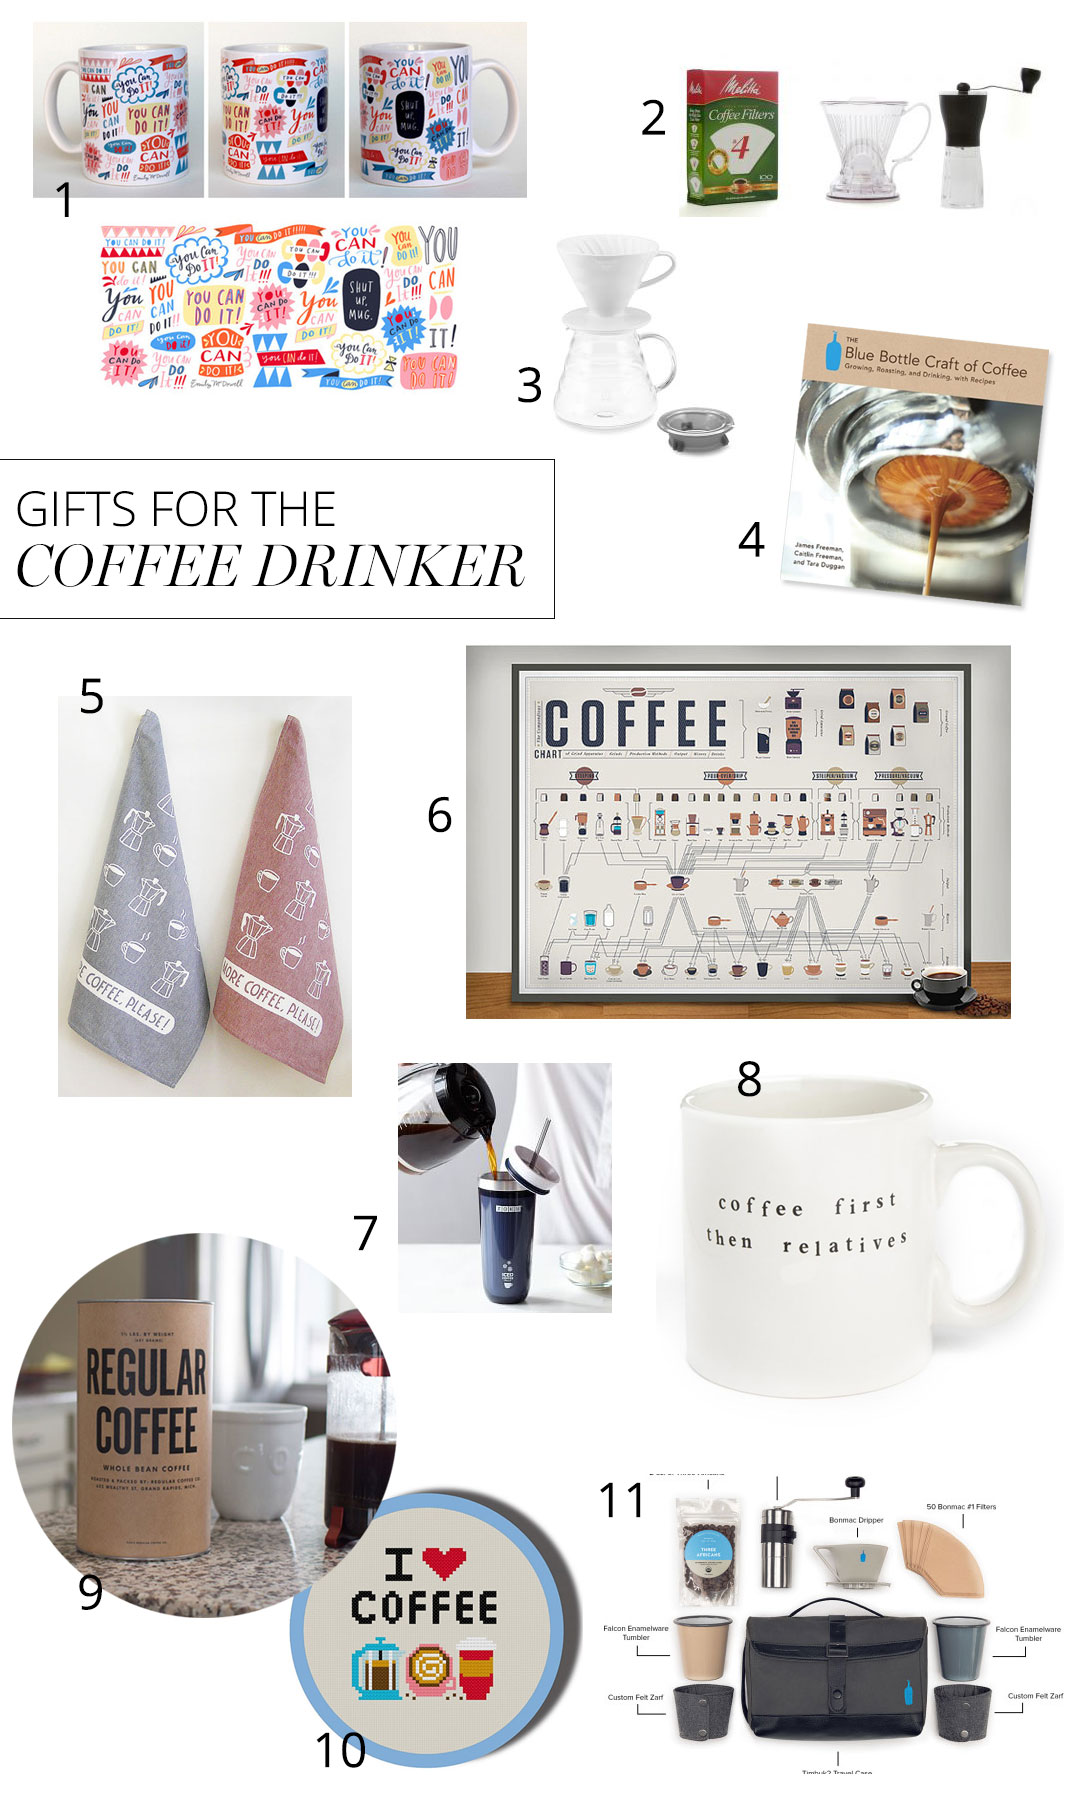 Gift Guide for Coffee Drinkers